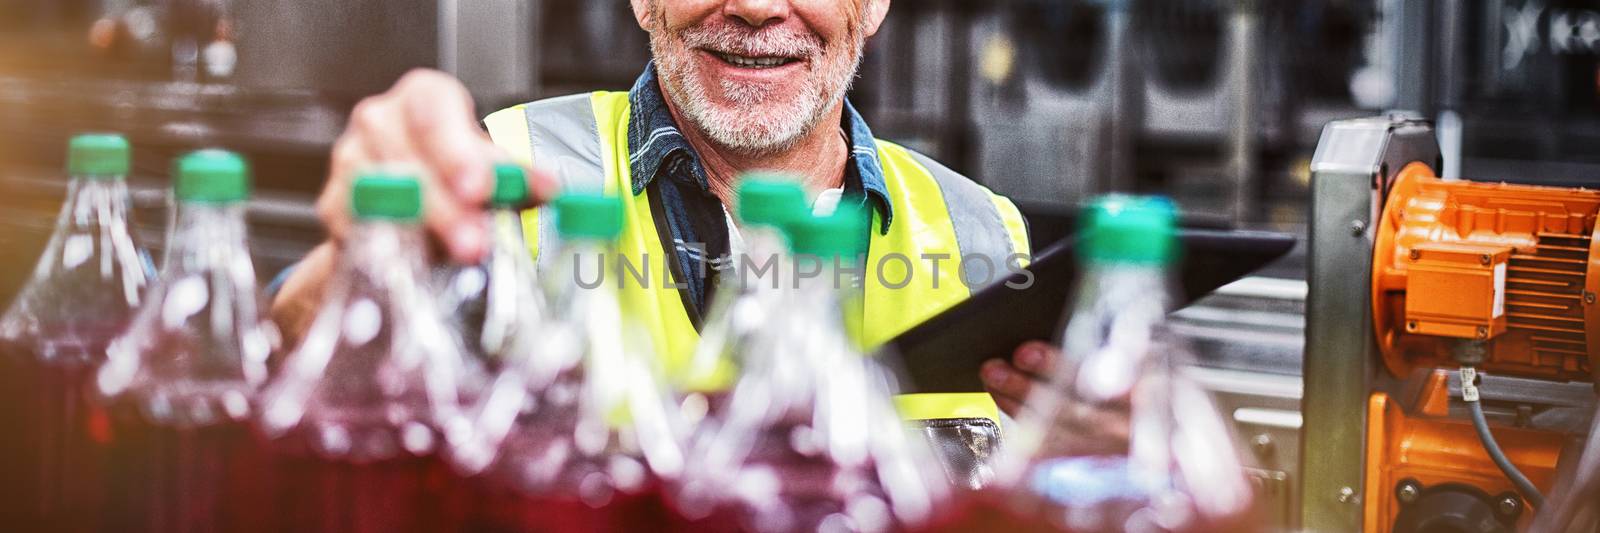 Portrait of male factory worker monitoring cold drink bottles at drinks production factory